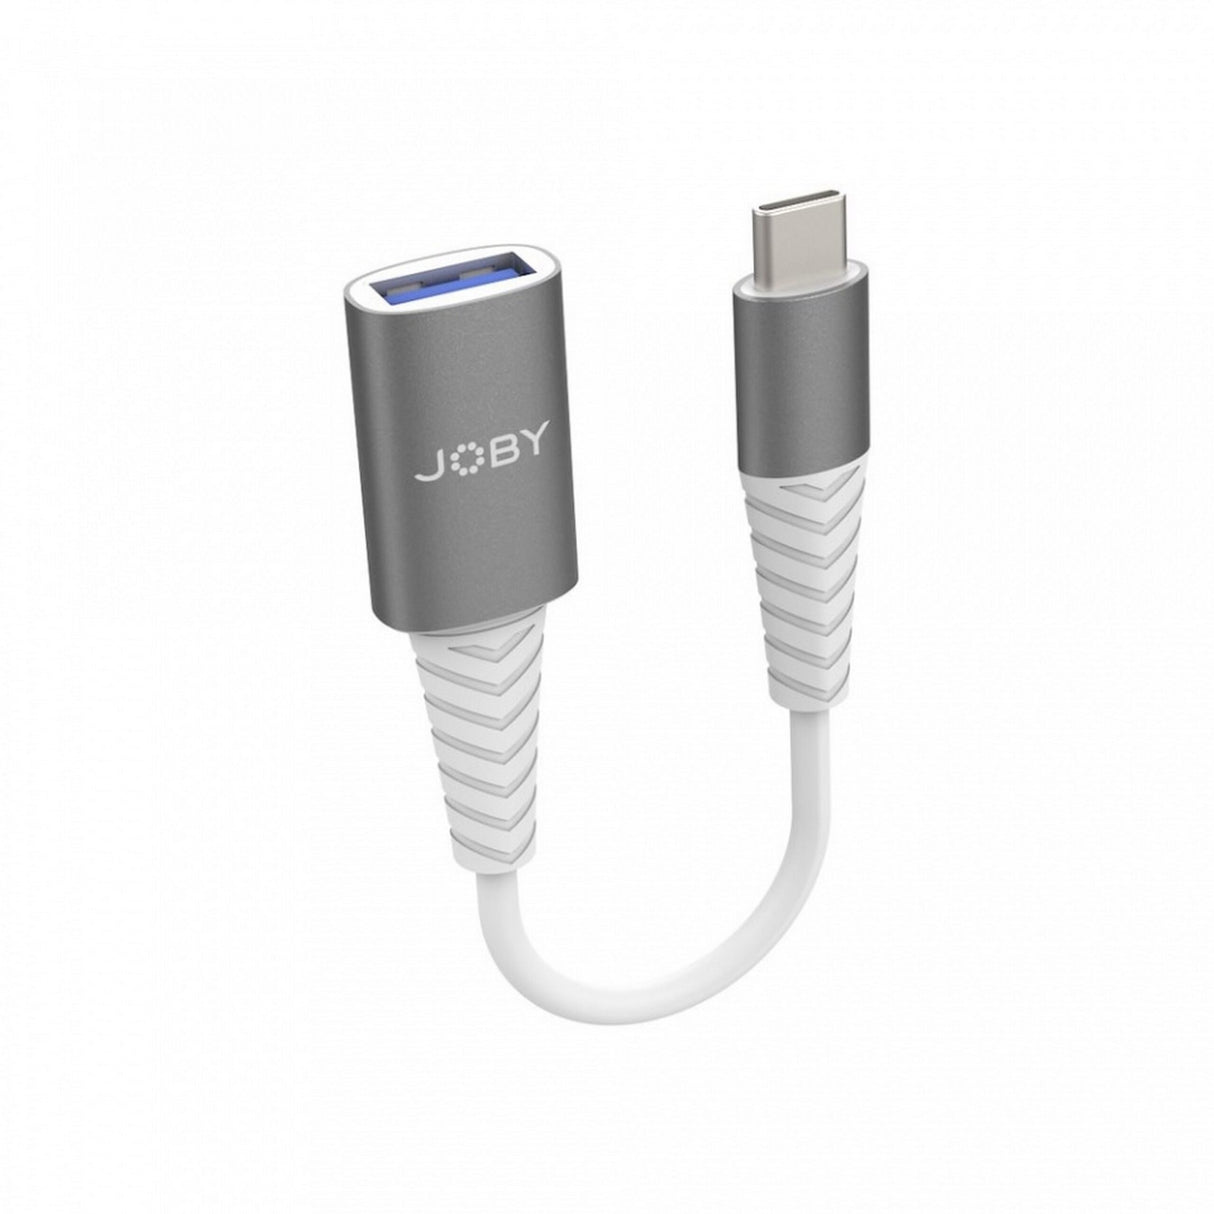 Joby JB01822 USB-C to USB-A 3.0 Adapter, Space Grey